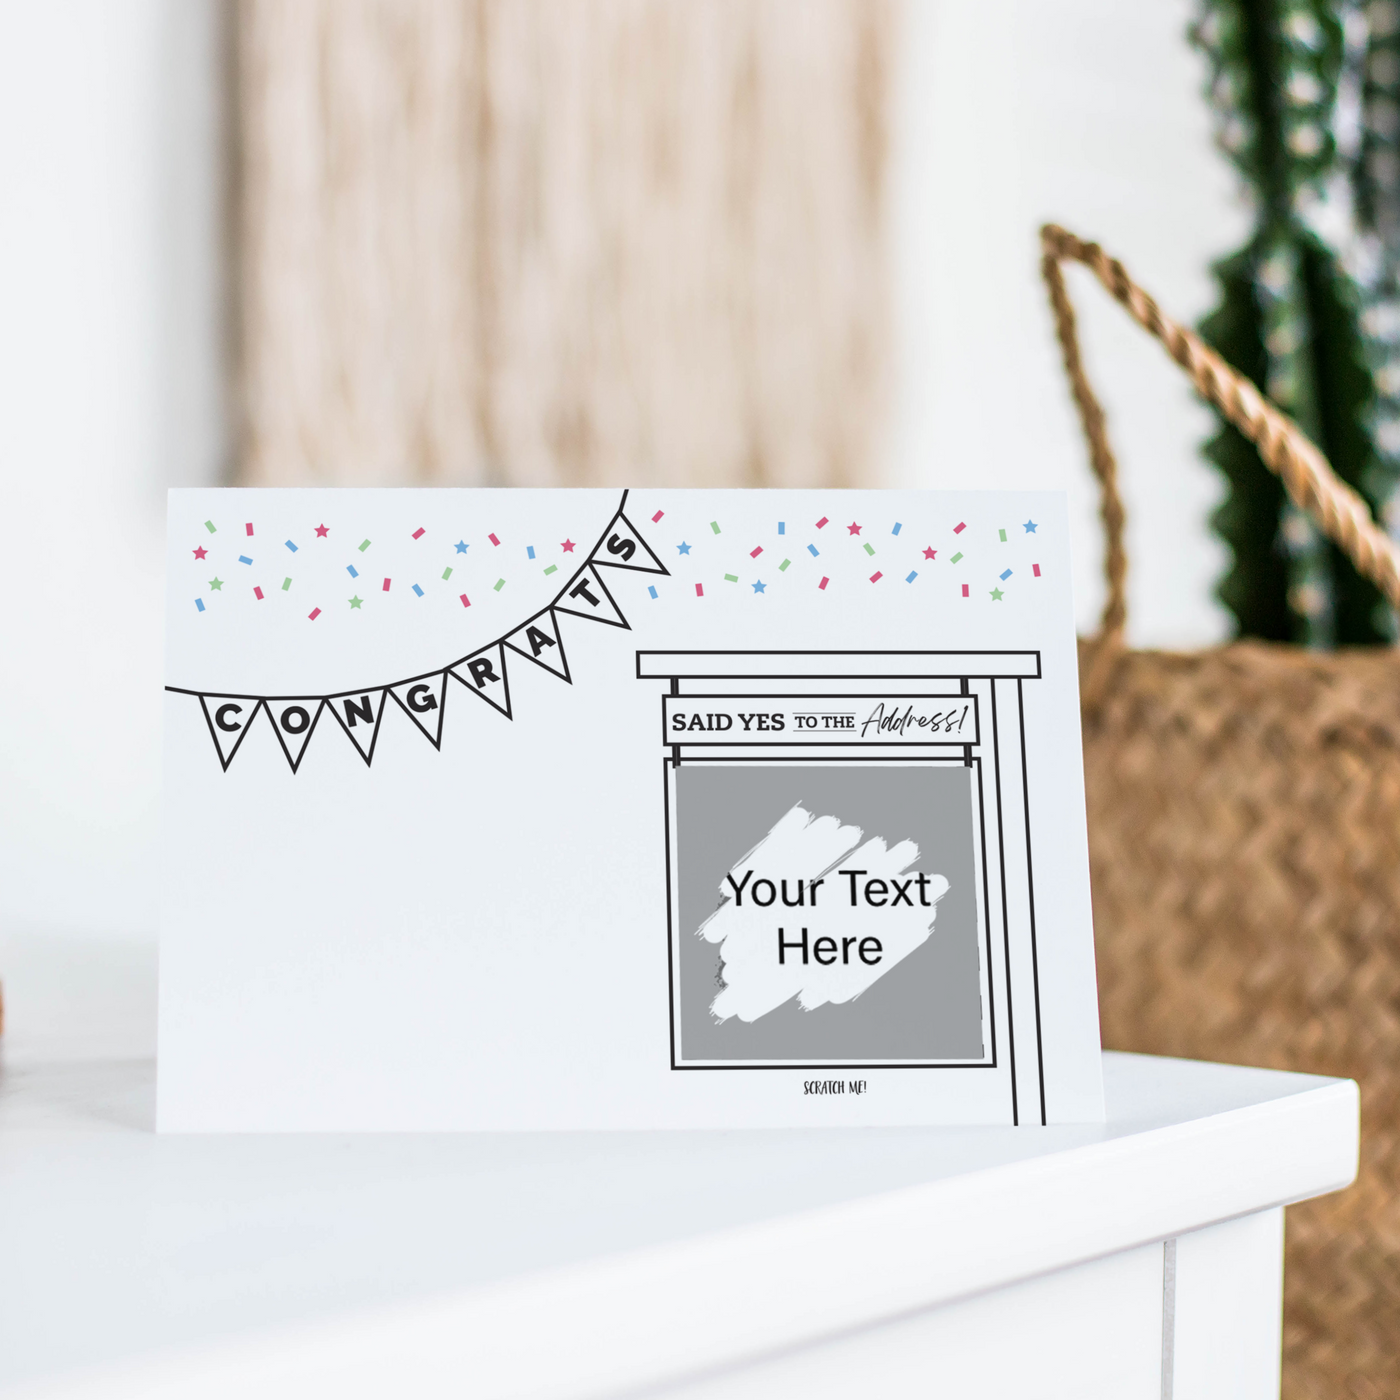 Scratch-Off Celebration Cards - Said Yes to the Address